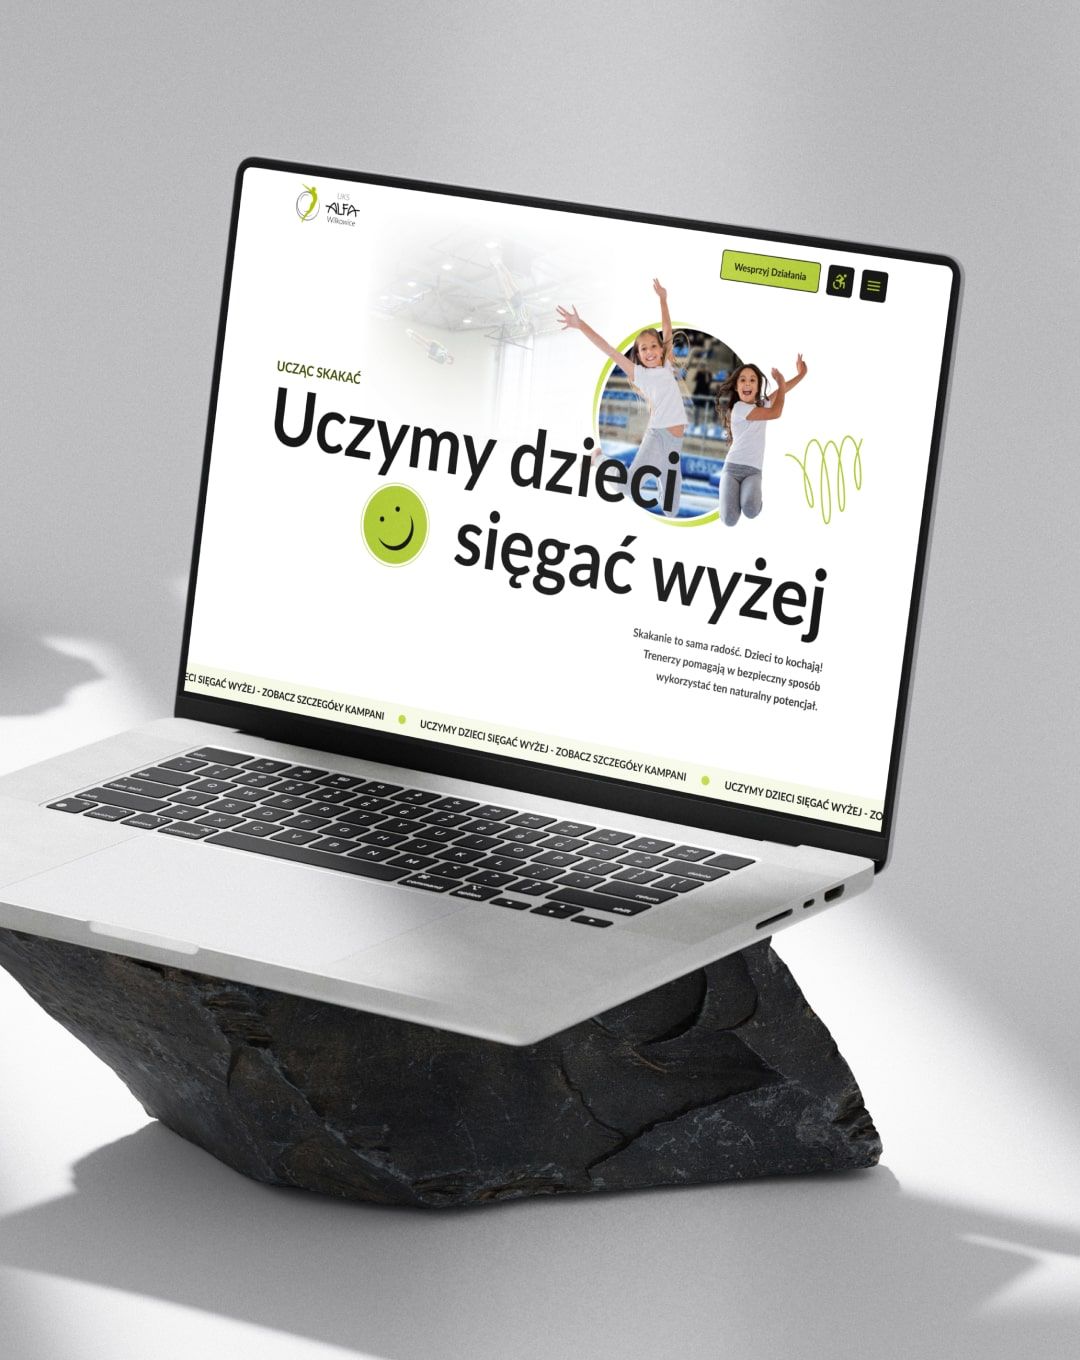 Home Page Banner Mockup on laptop view - By teaching trampoline jumping - we teach children to achieve more